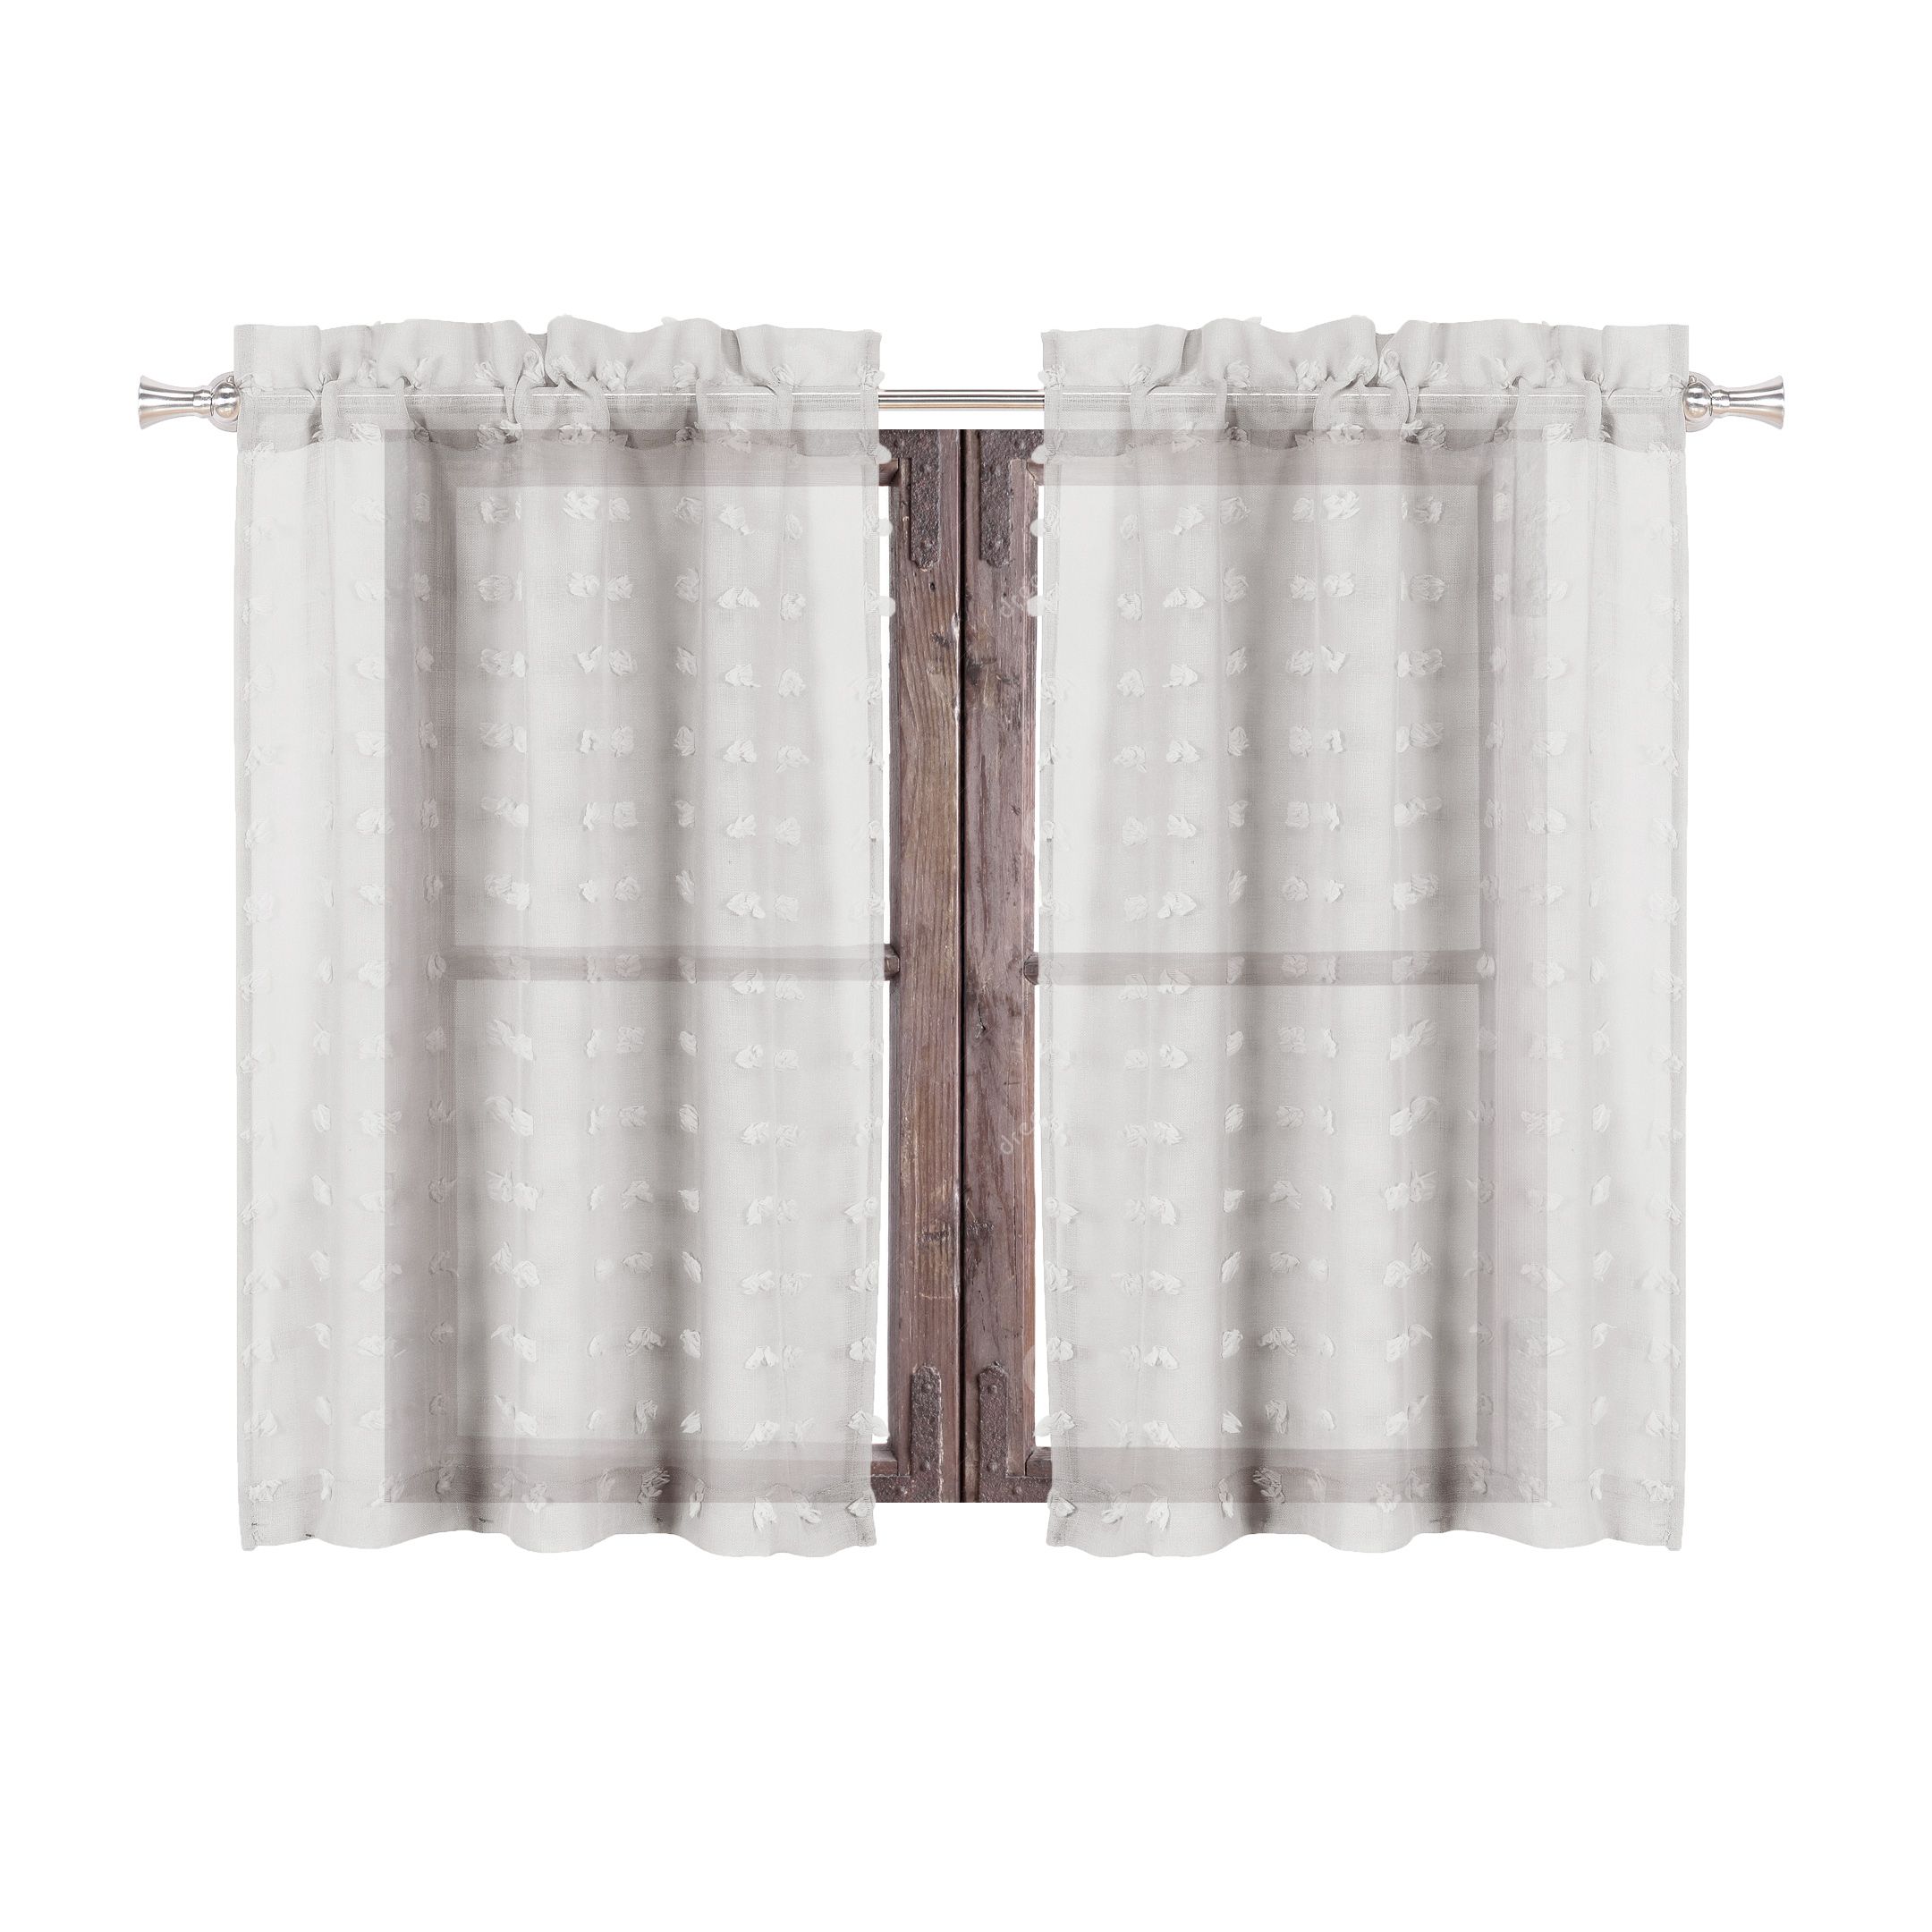 Sheer 2 Piece Silver Café/tier Curtain Set: 3 D Soft Tufts Throughout Sheer Lace Elongated Kitchen Curtain Tier Pairs (View 10 of 20)